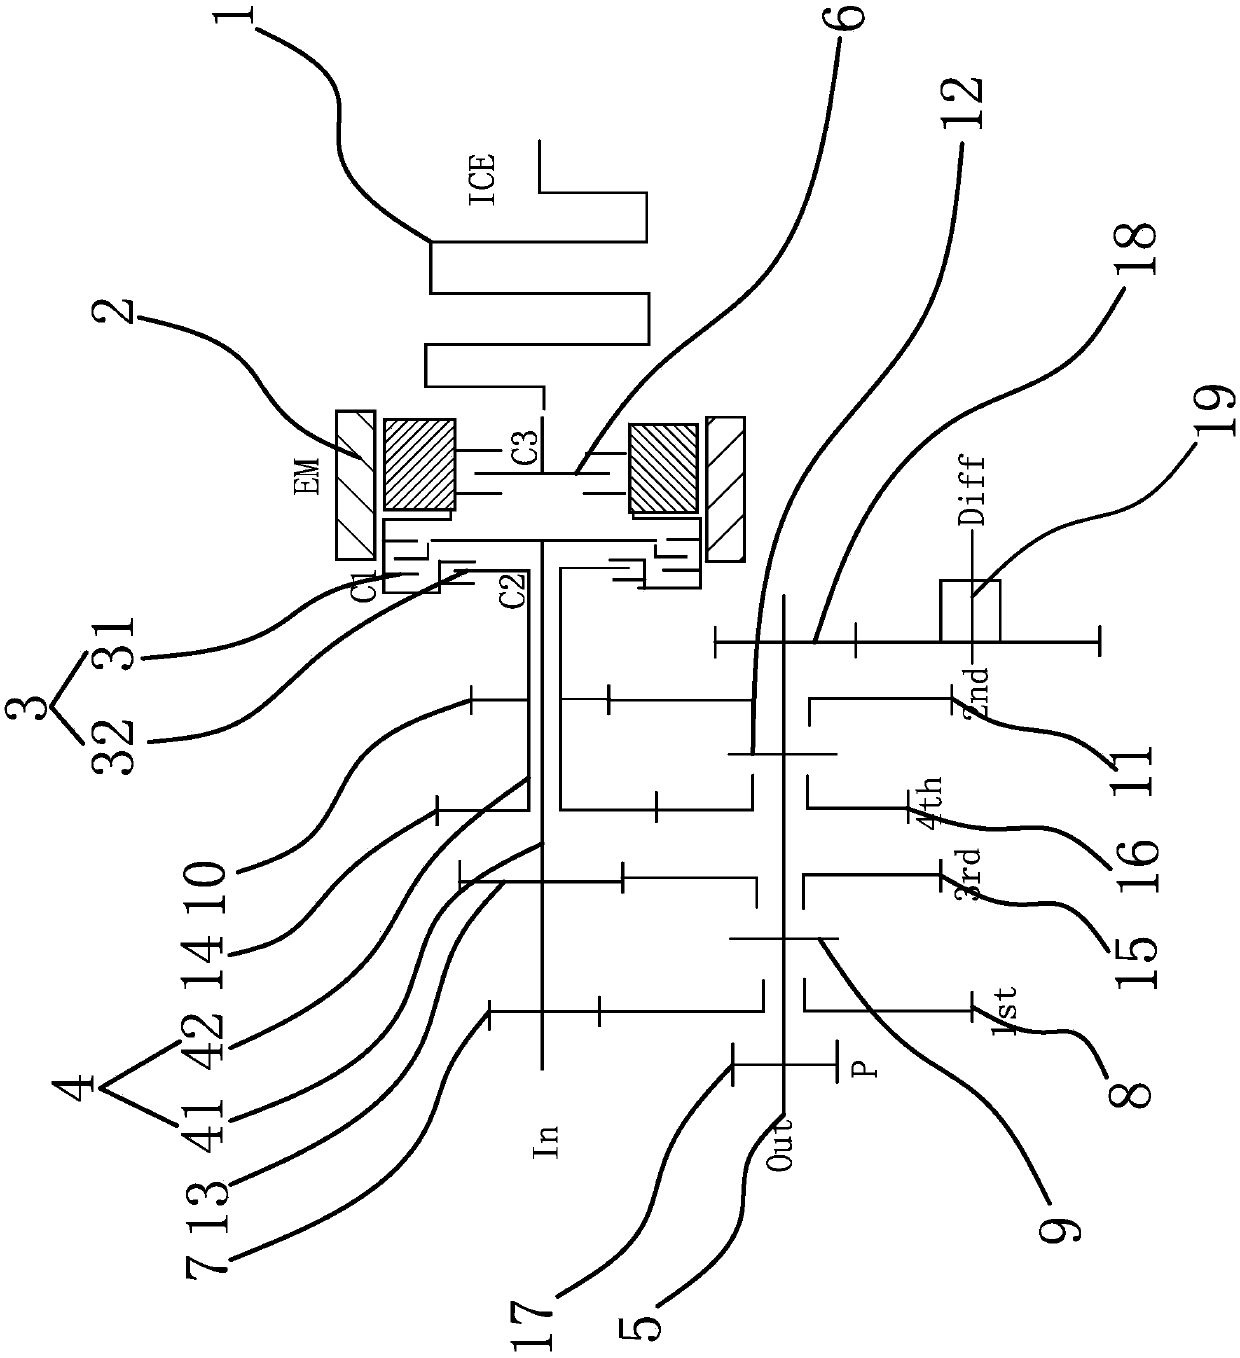 Transmission system of gearbox of hybrid electric vehicle